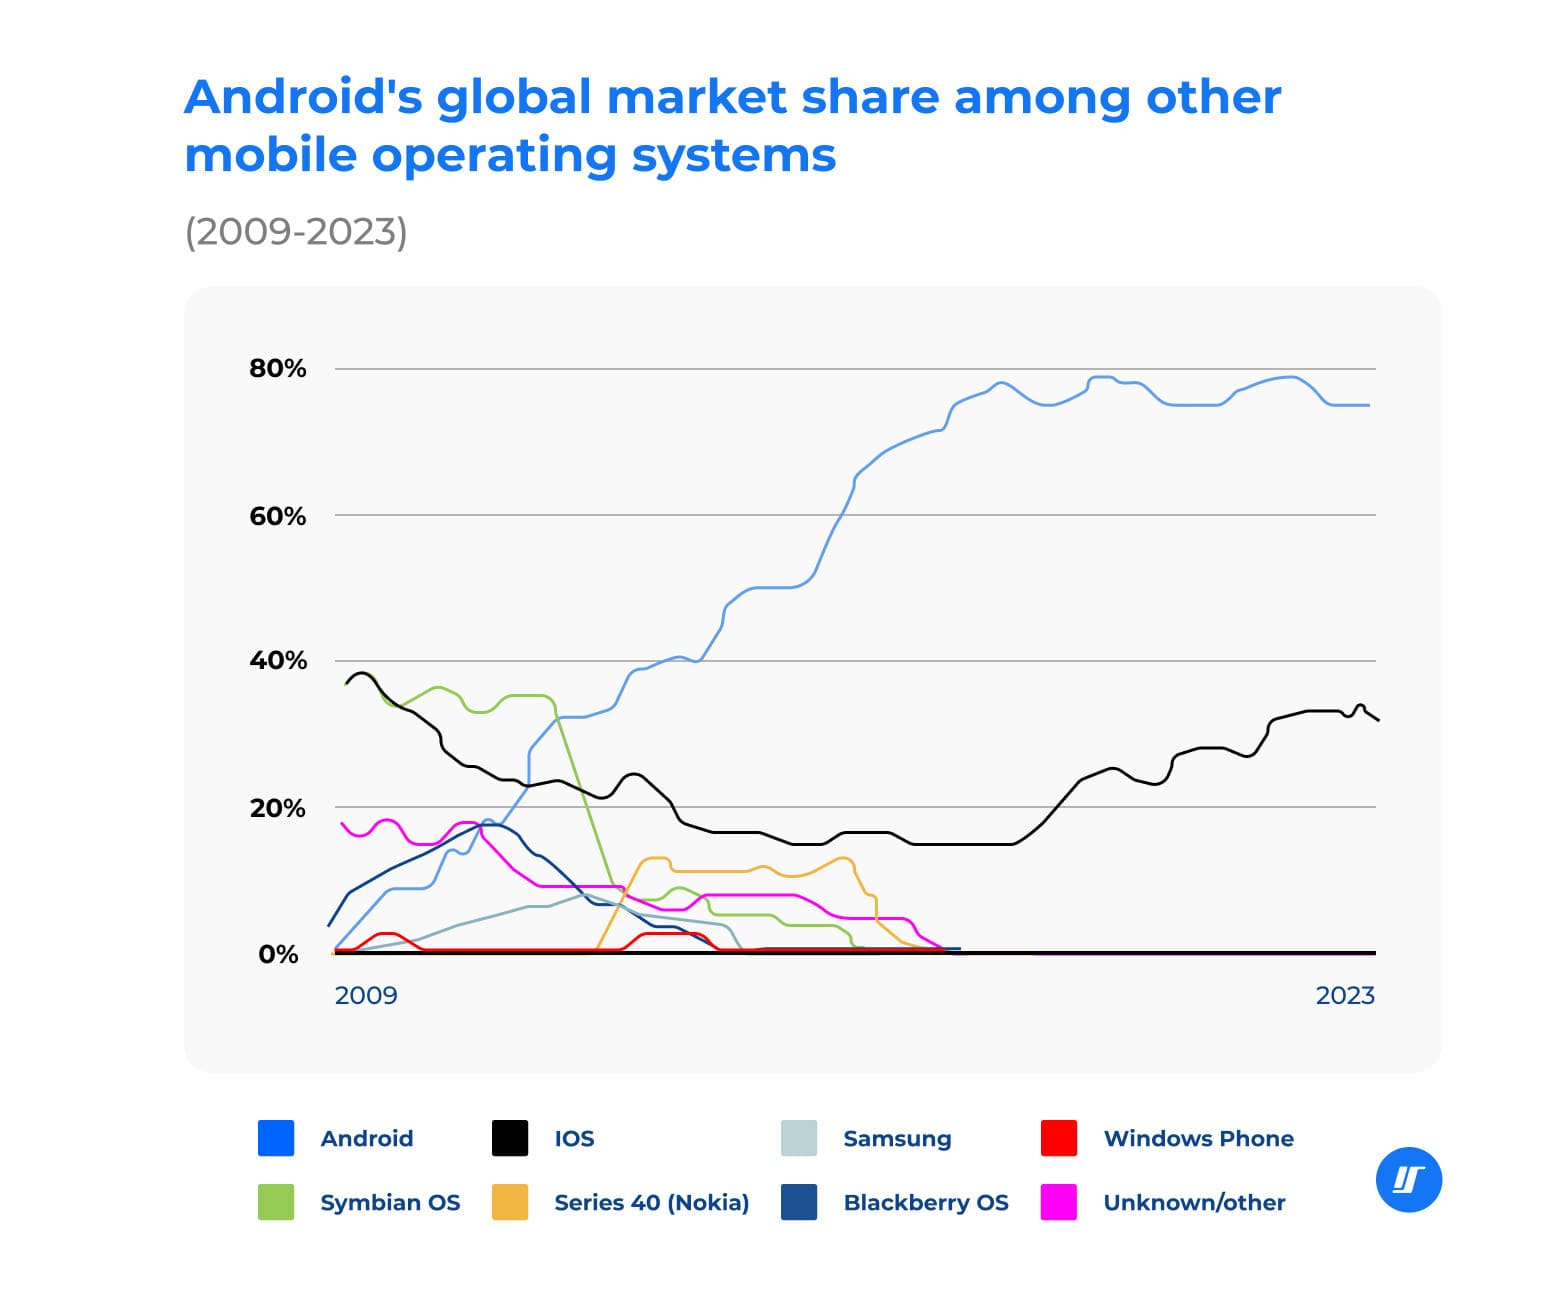 Graph of the global market share of Android among other mobile operating systems (2009-2023)